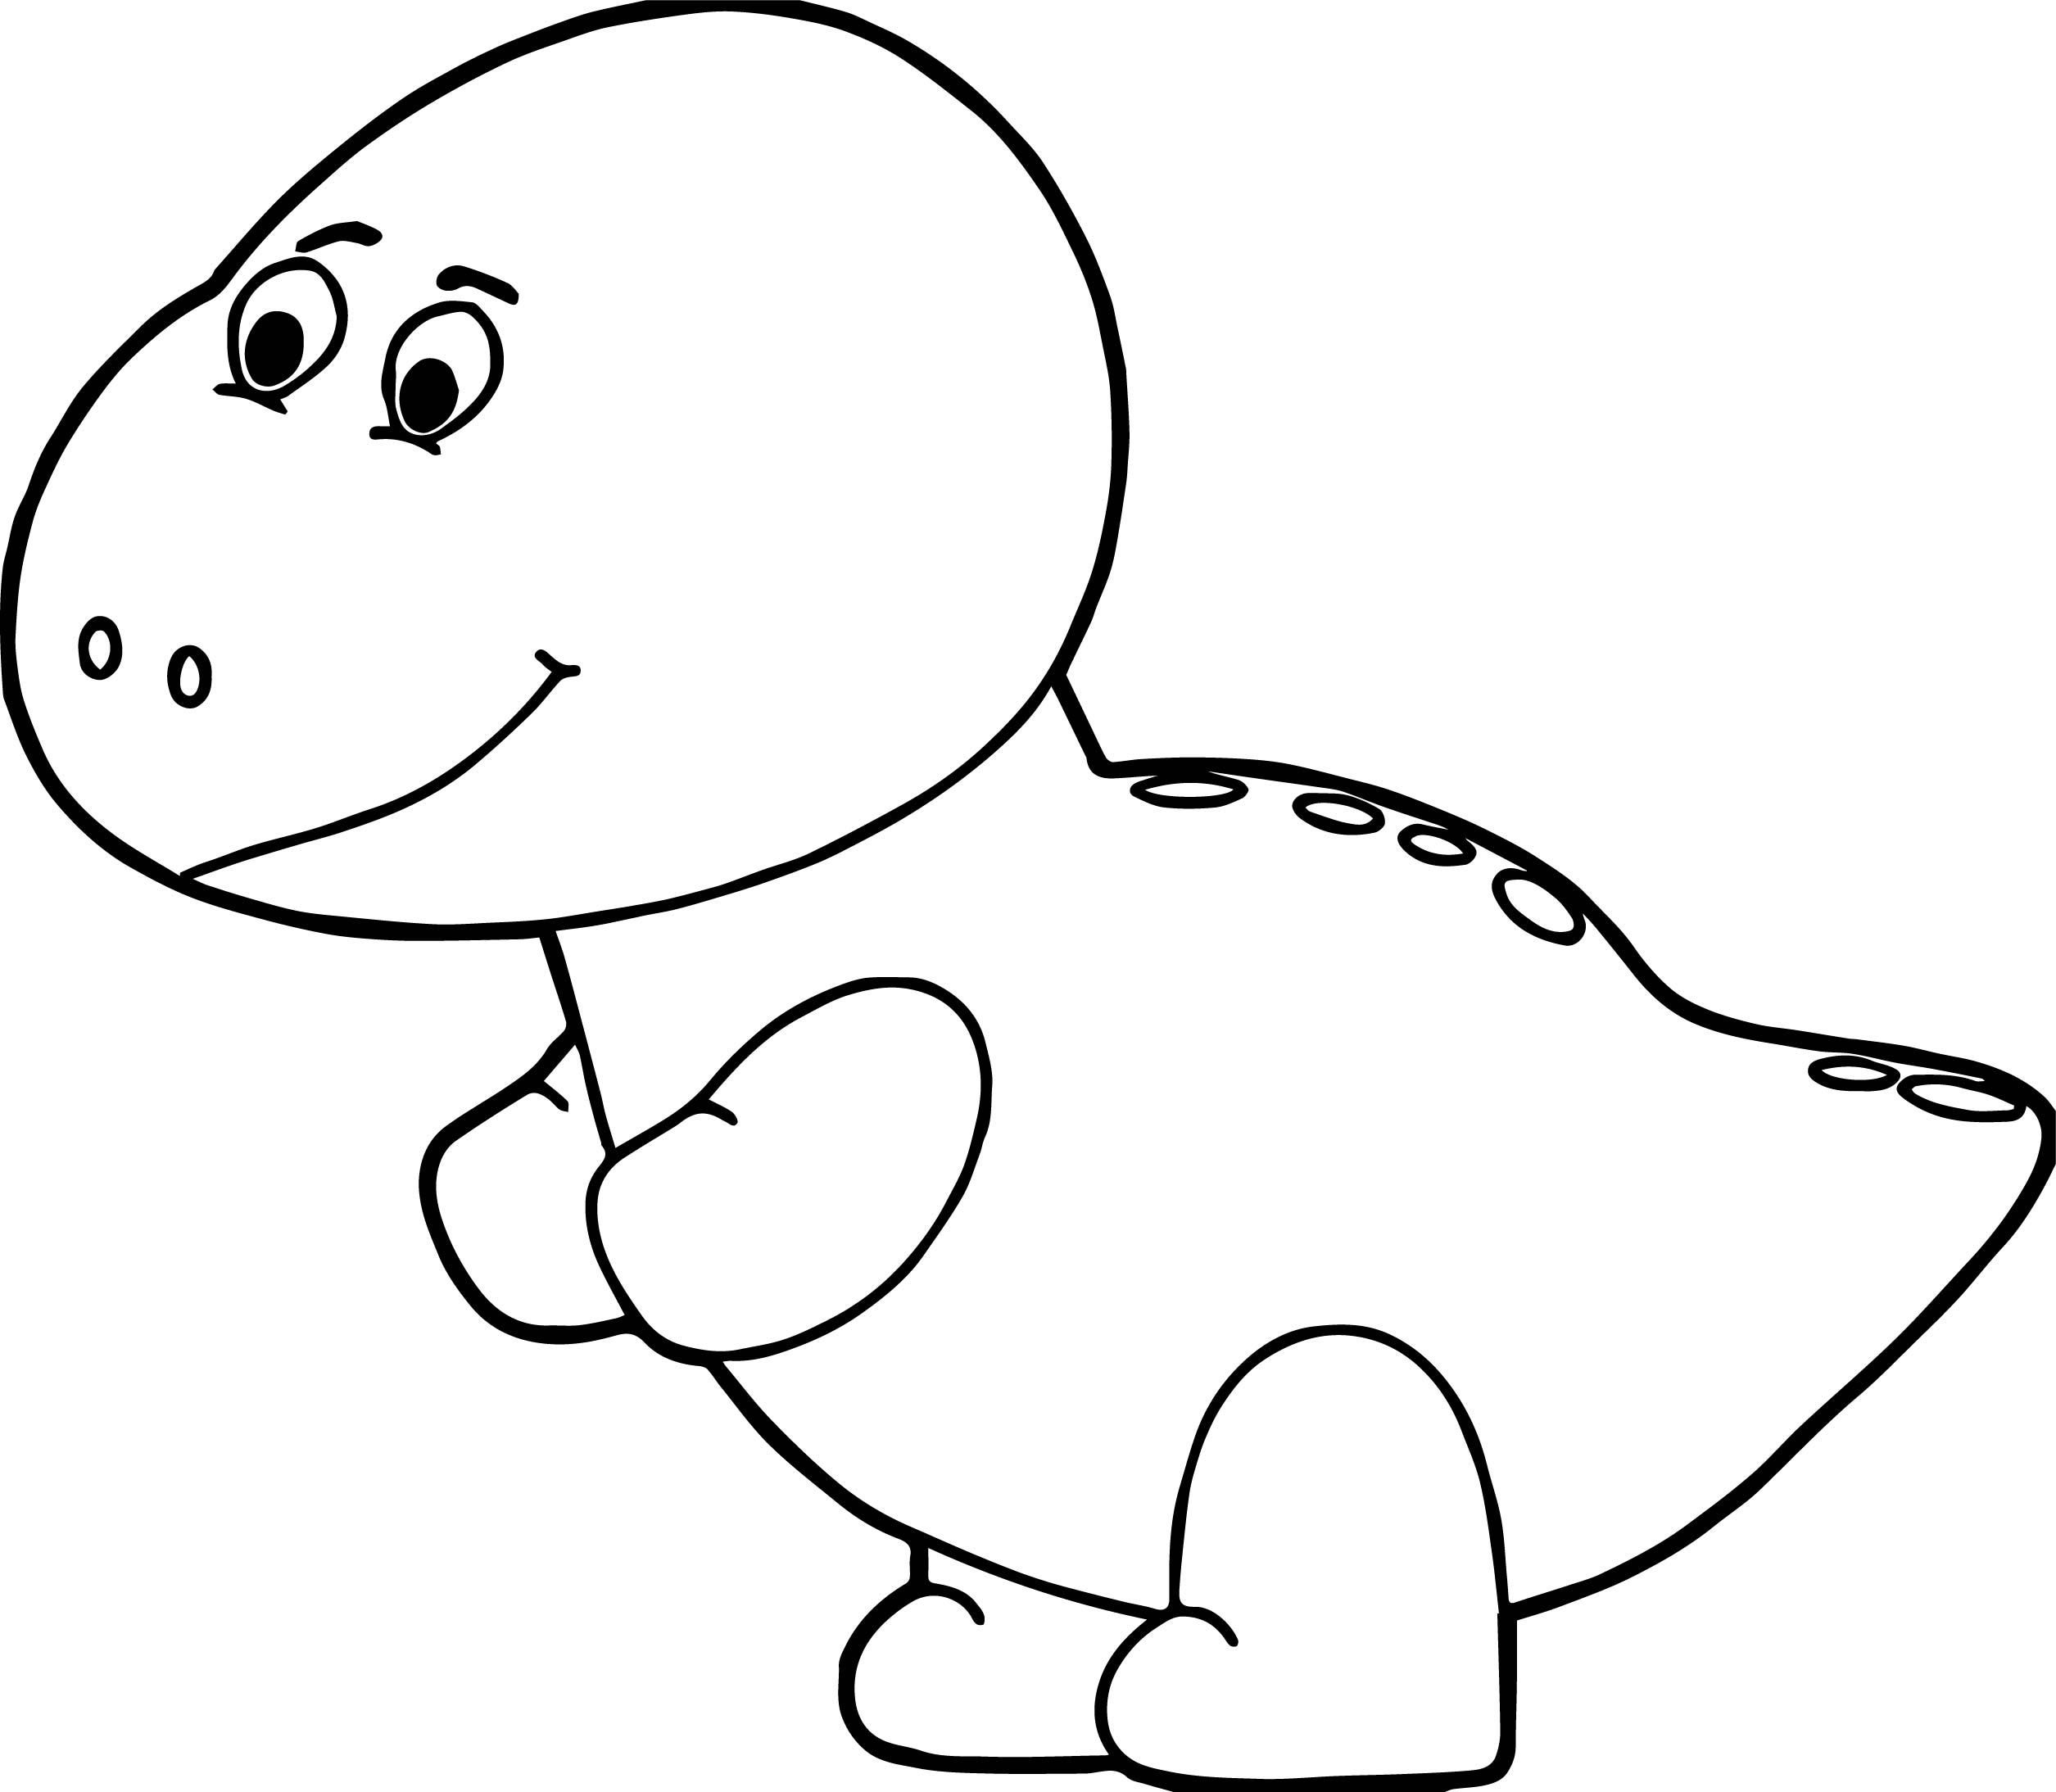 Dinosaur Egg Coloring Page | Free download on ClipArtMag